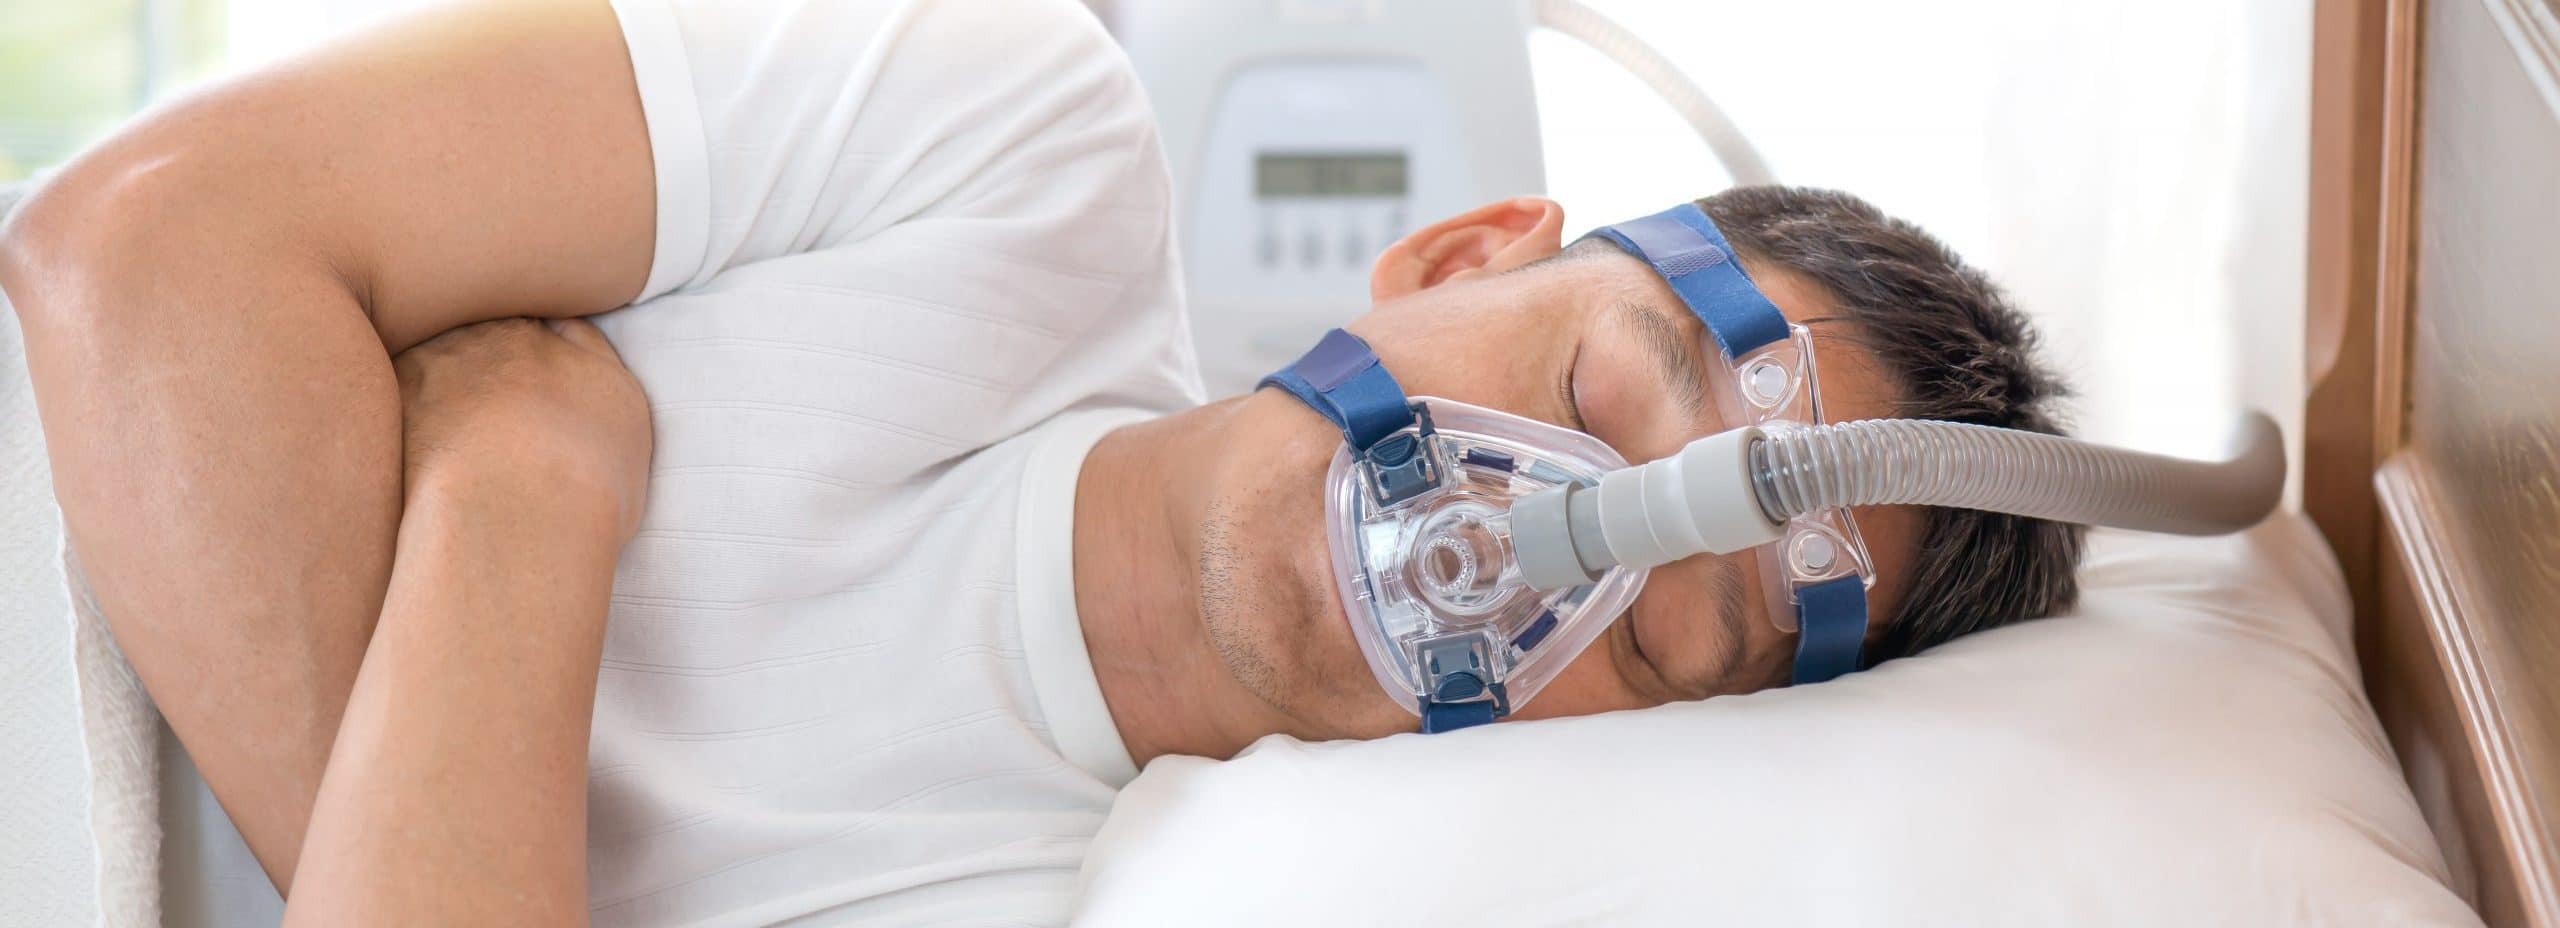 Which Tests Diagnose Sleep Disorders?